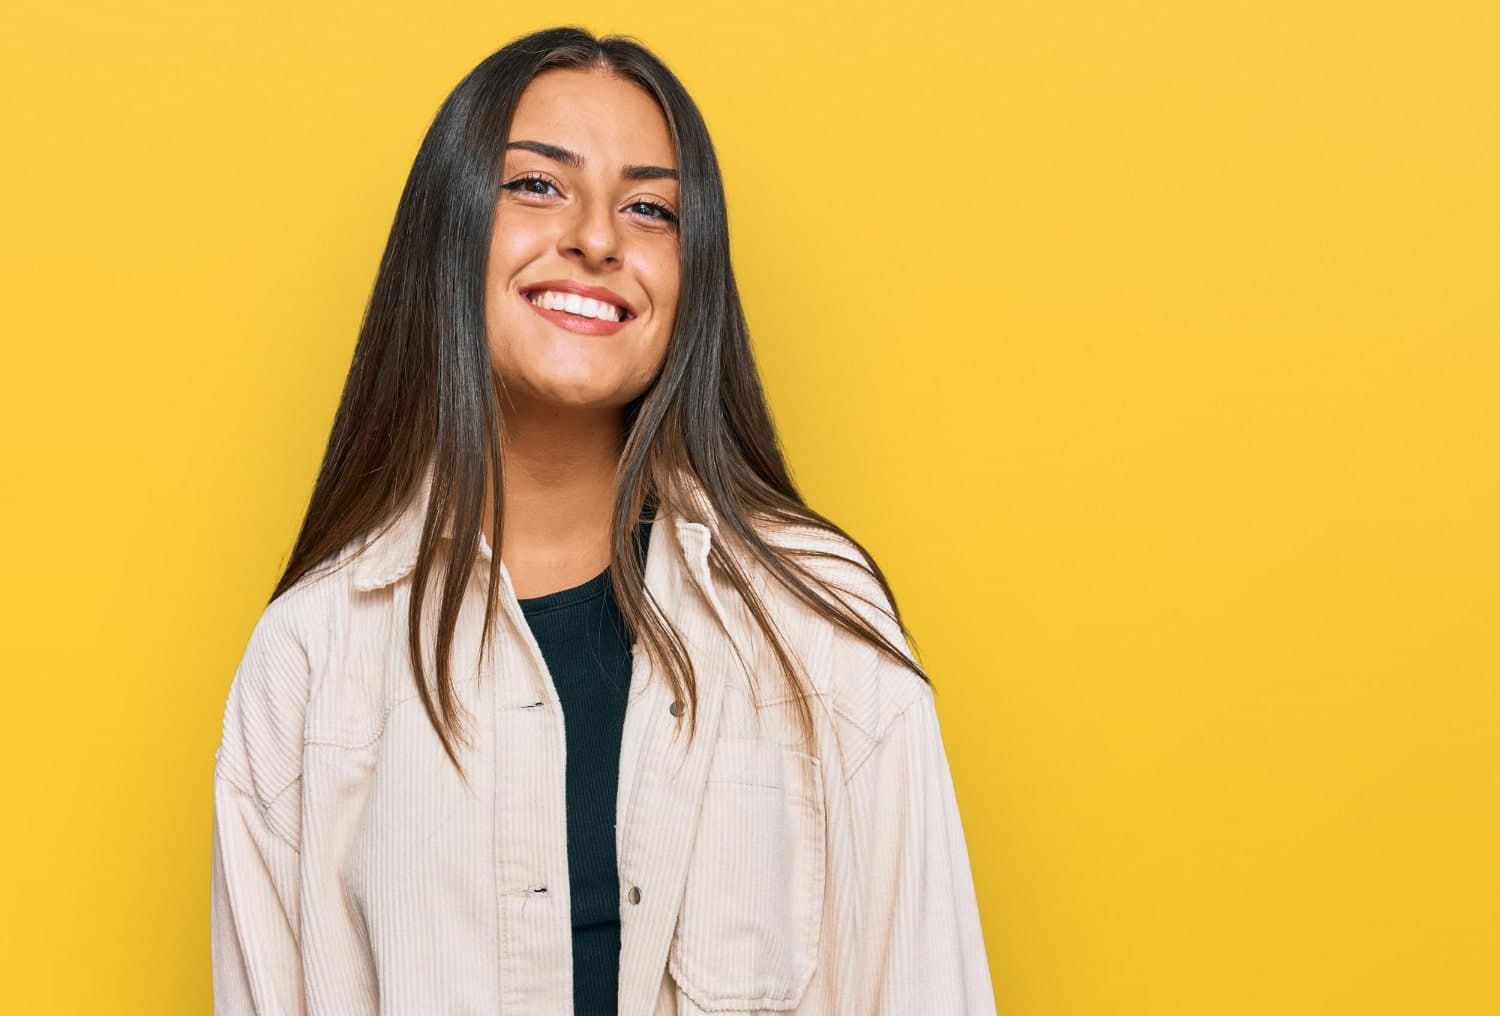 Beautiful Hispanic woman in casual clothing standing happily, smiling with a confident smile showing teeth wondering about teeth shifting after braces